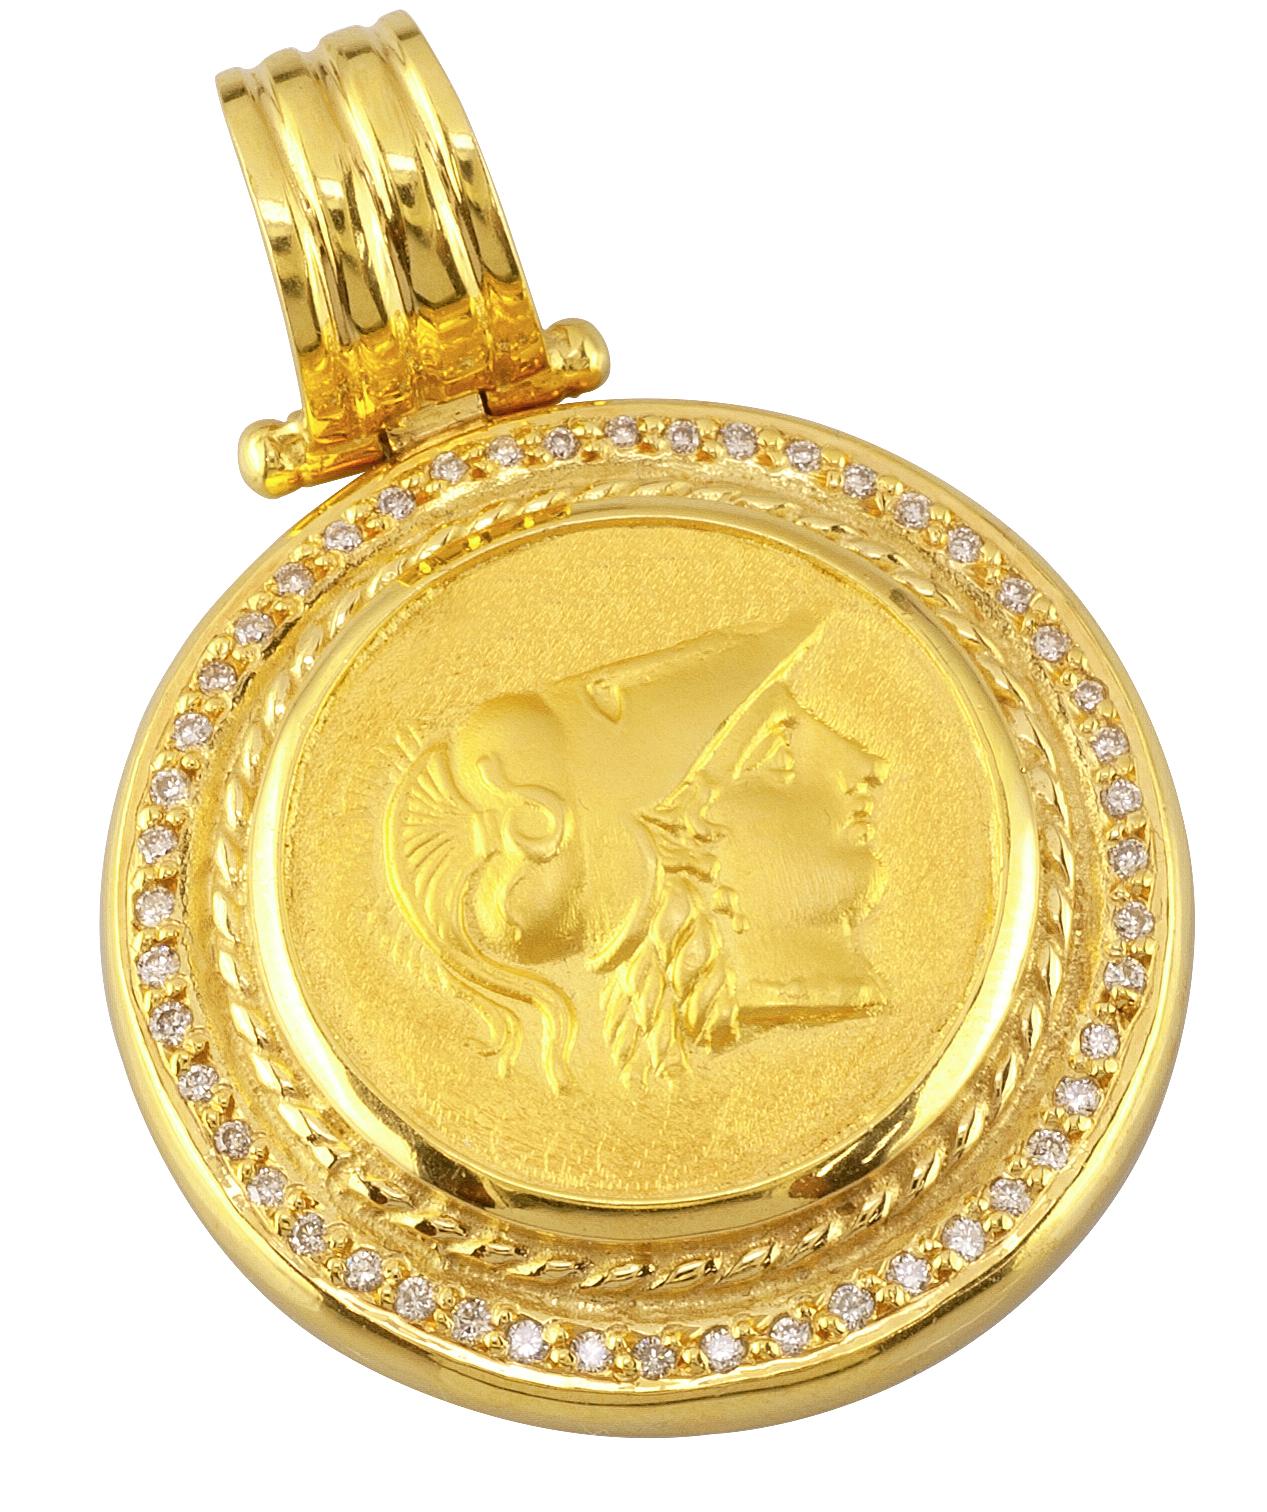 S.Georgios designer solid 18 Karat Yellow Gold diamond Coin Pendant is all made by hand and features a Gold Coin of Athena, the symbol of knowledge, the protector of Athens, and the most known coin in the world. (the coin is an exact copy of the